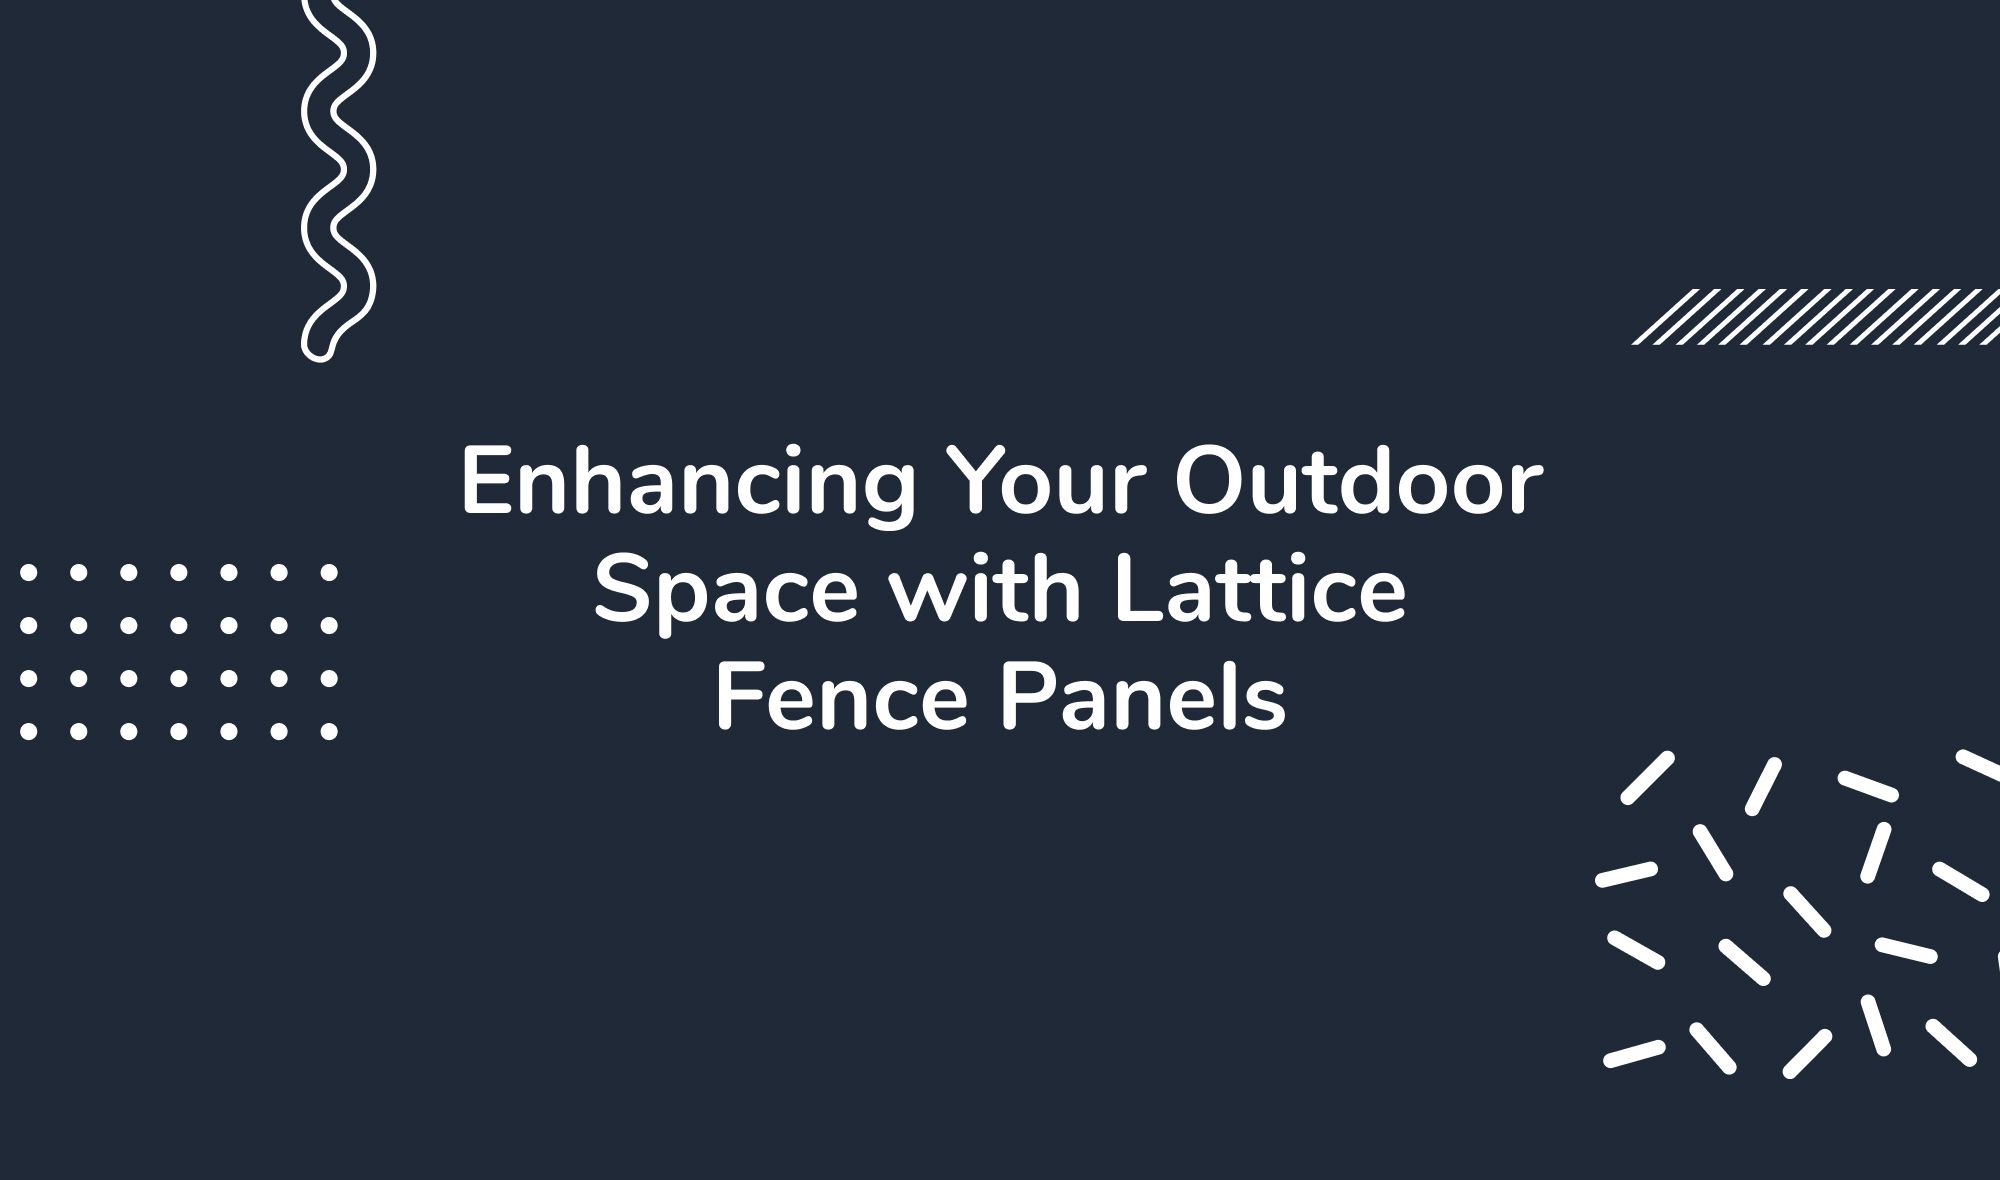 Enhancing Your Outdoor Space with Lattice Fence Panels